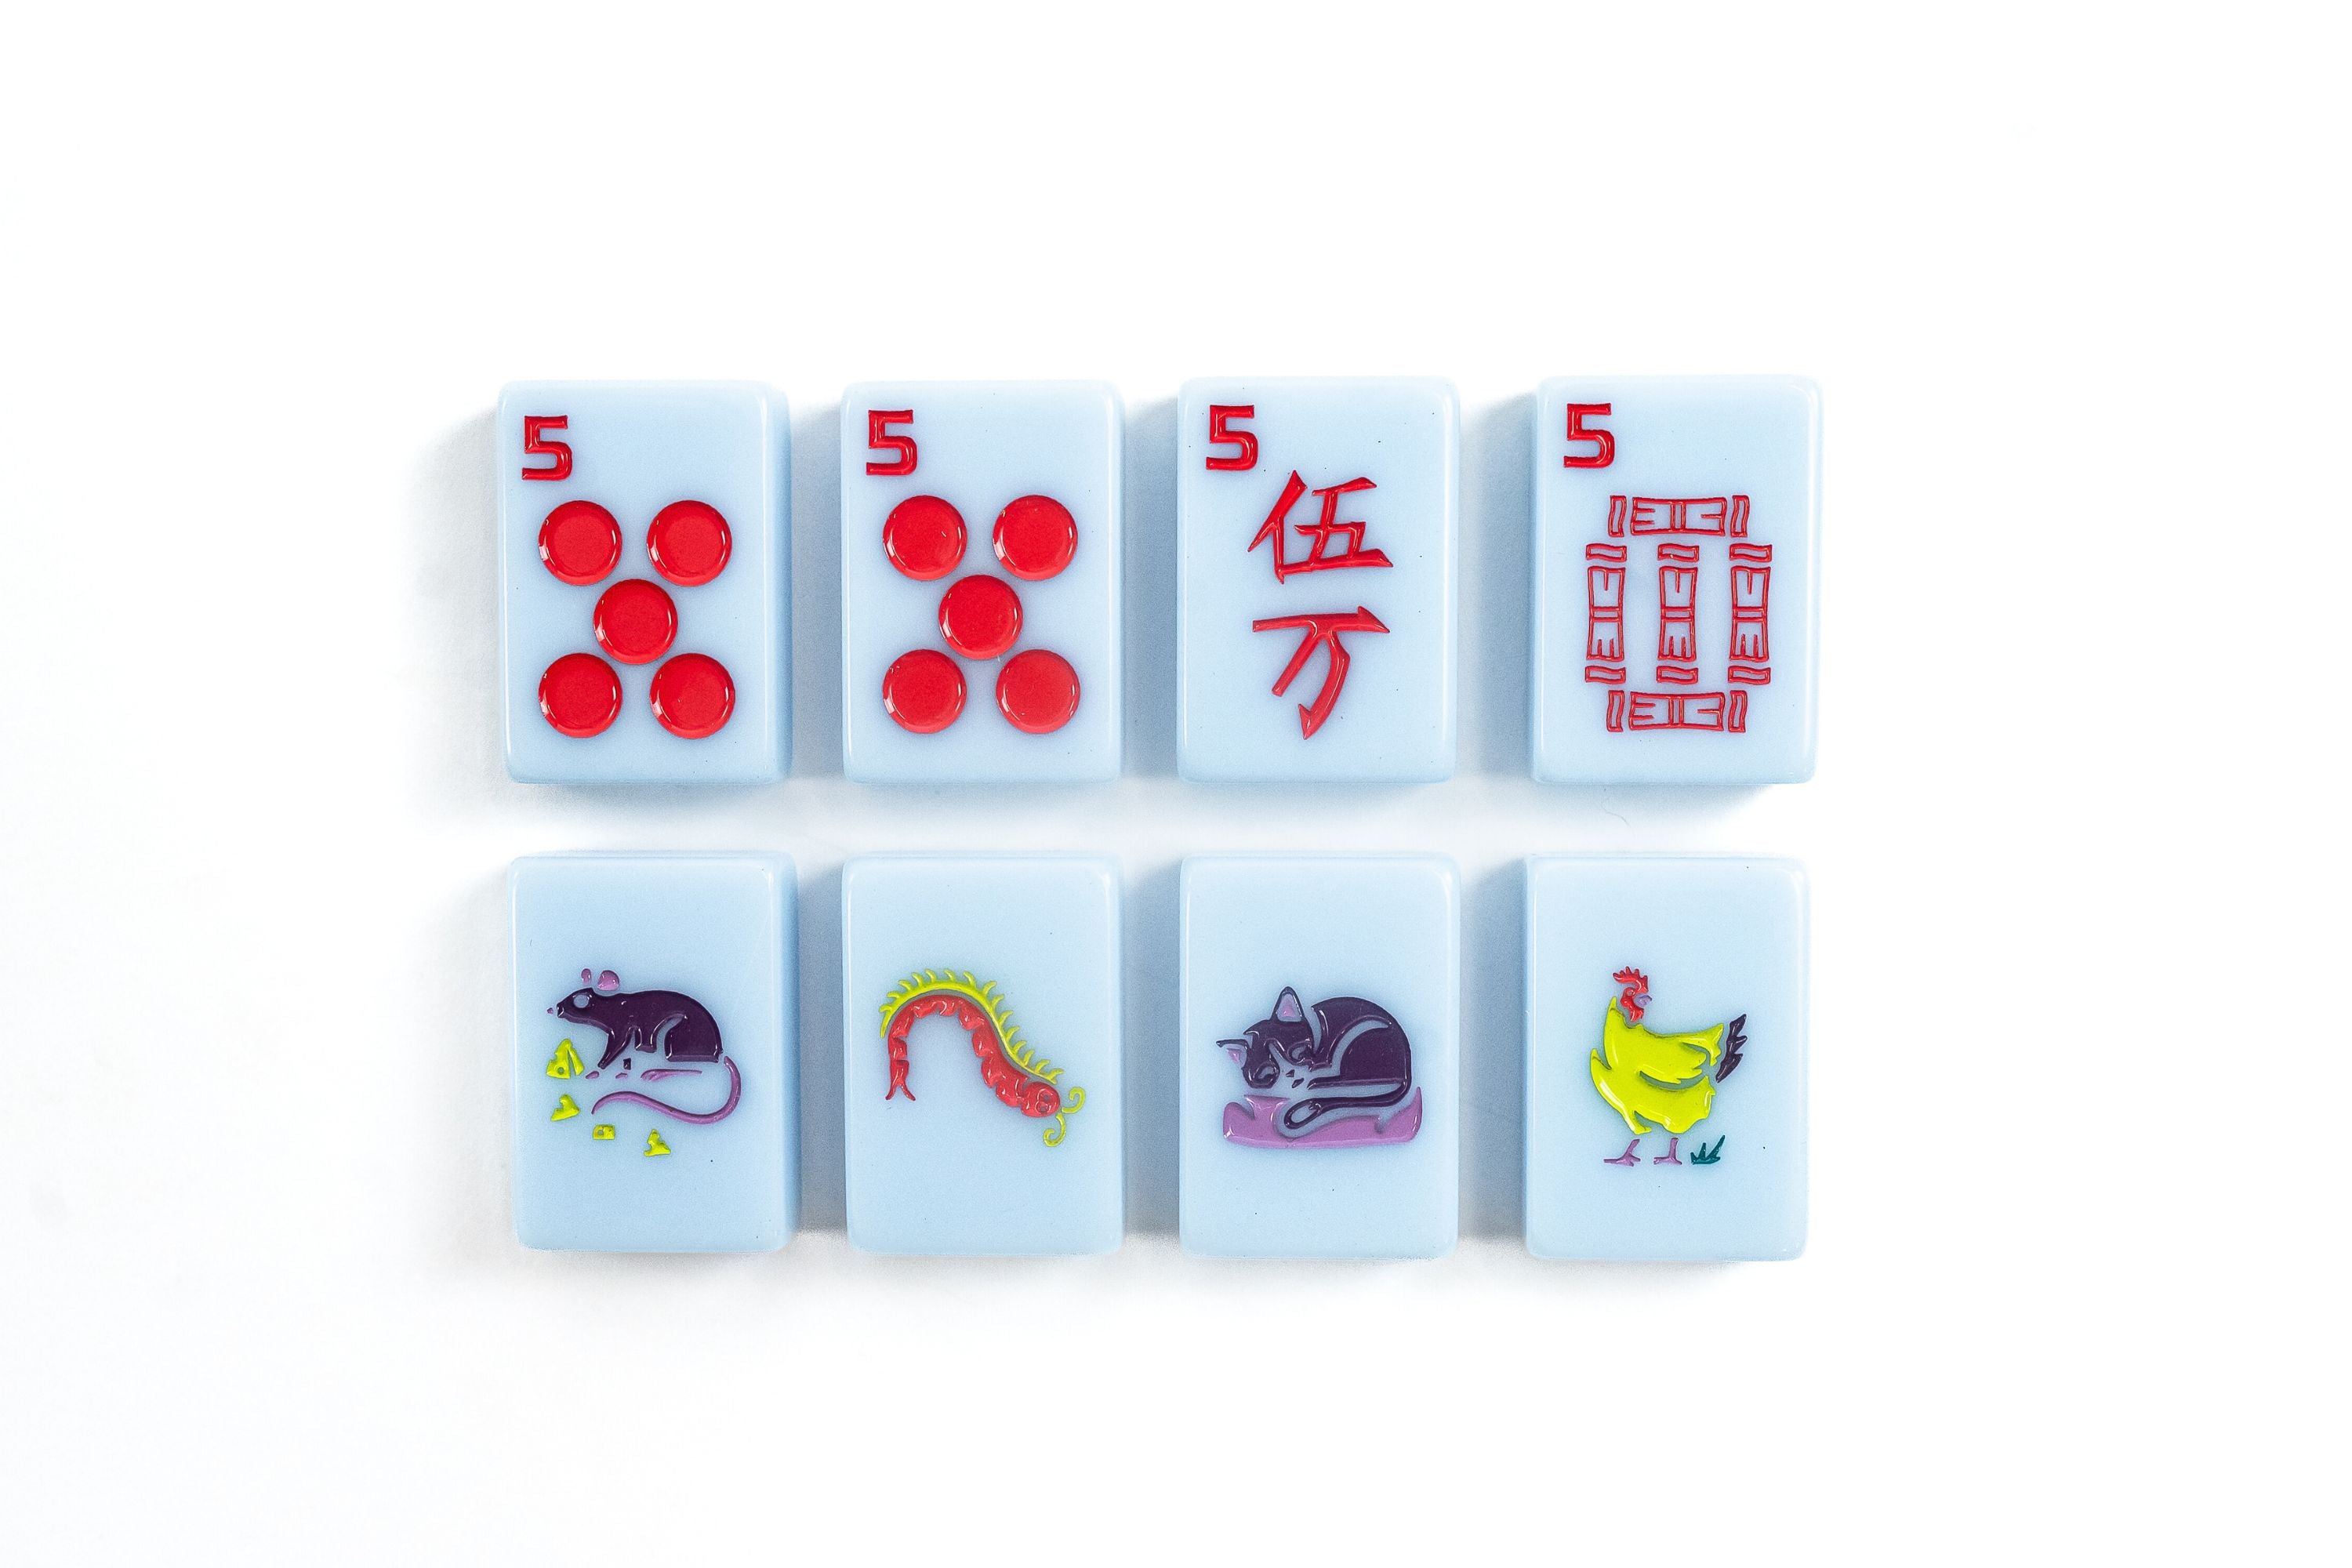 Mahjong Classic Online Gifts & Merchandise for Sale